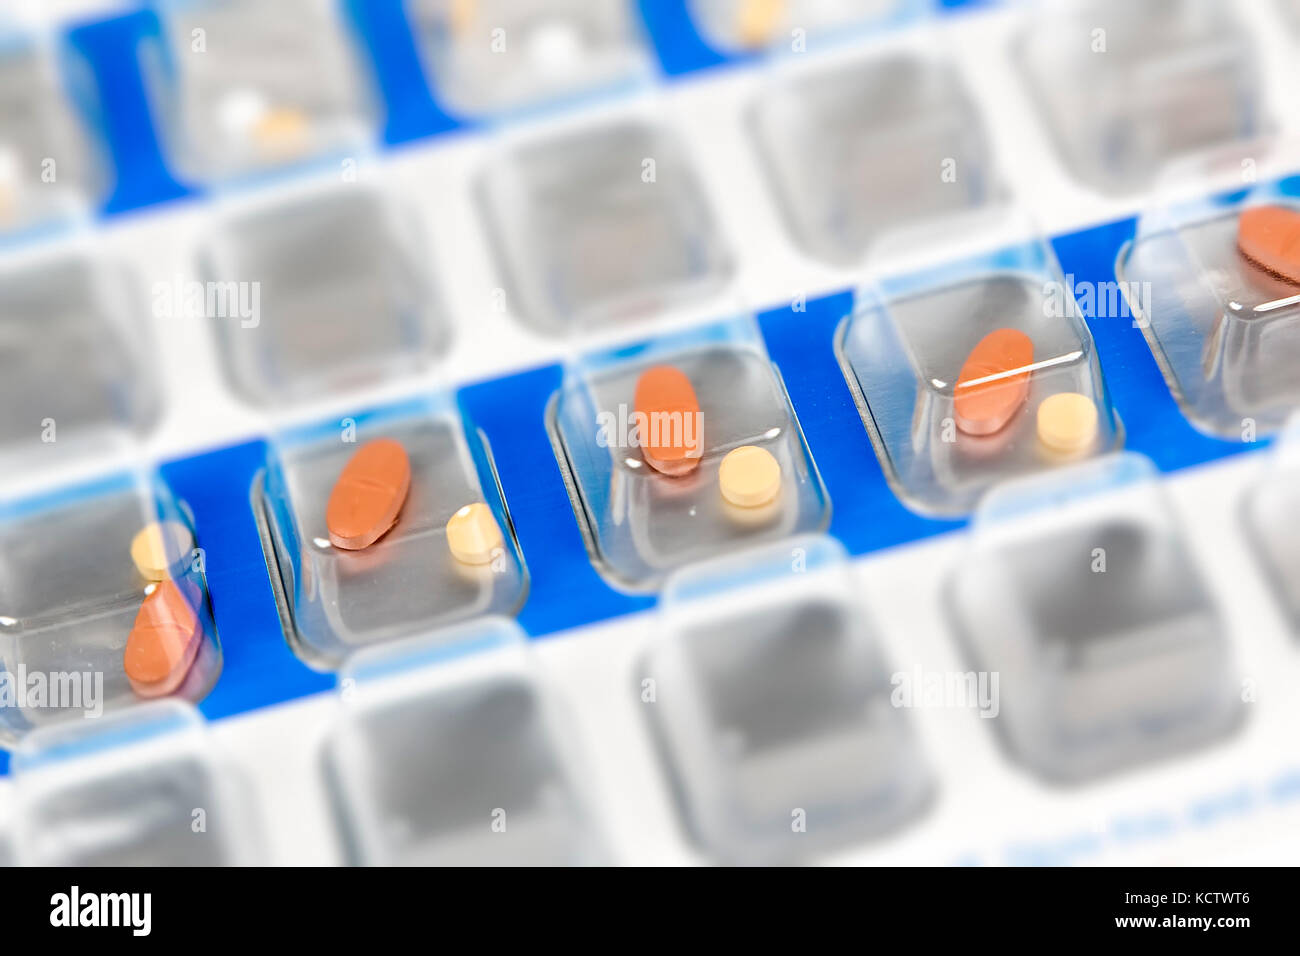 Pills in blister pack prepared doses for elderly patient with dementia Stock Photo